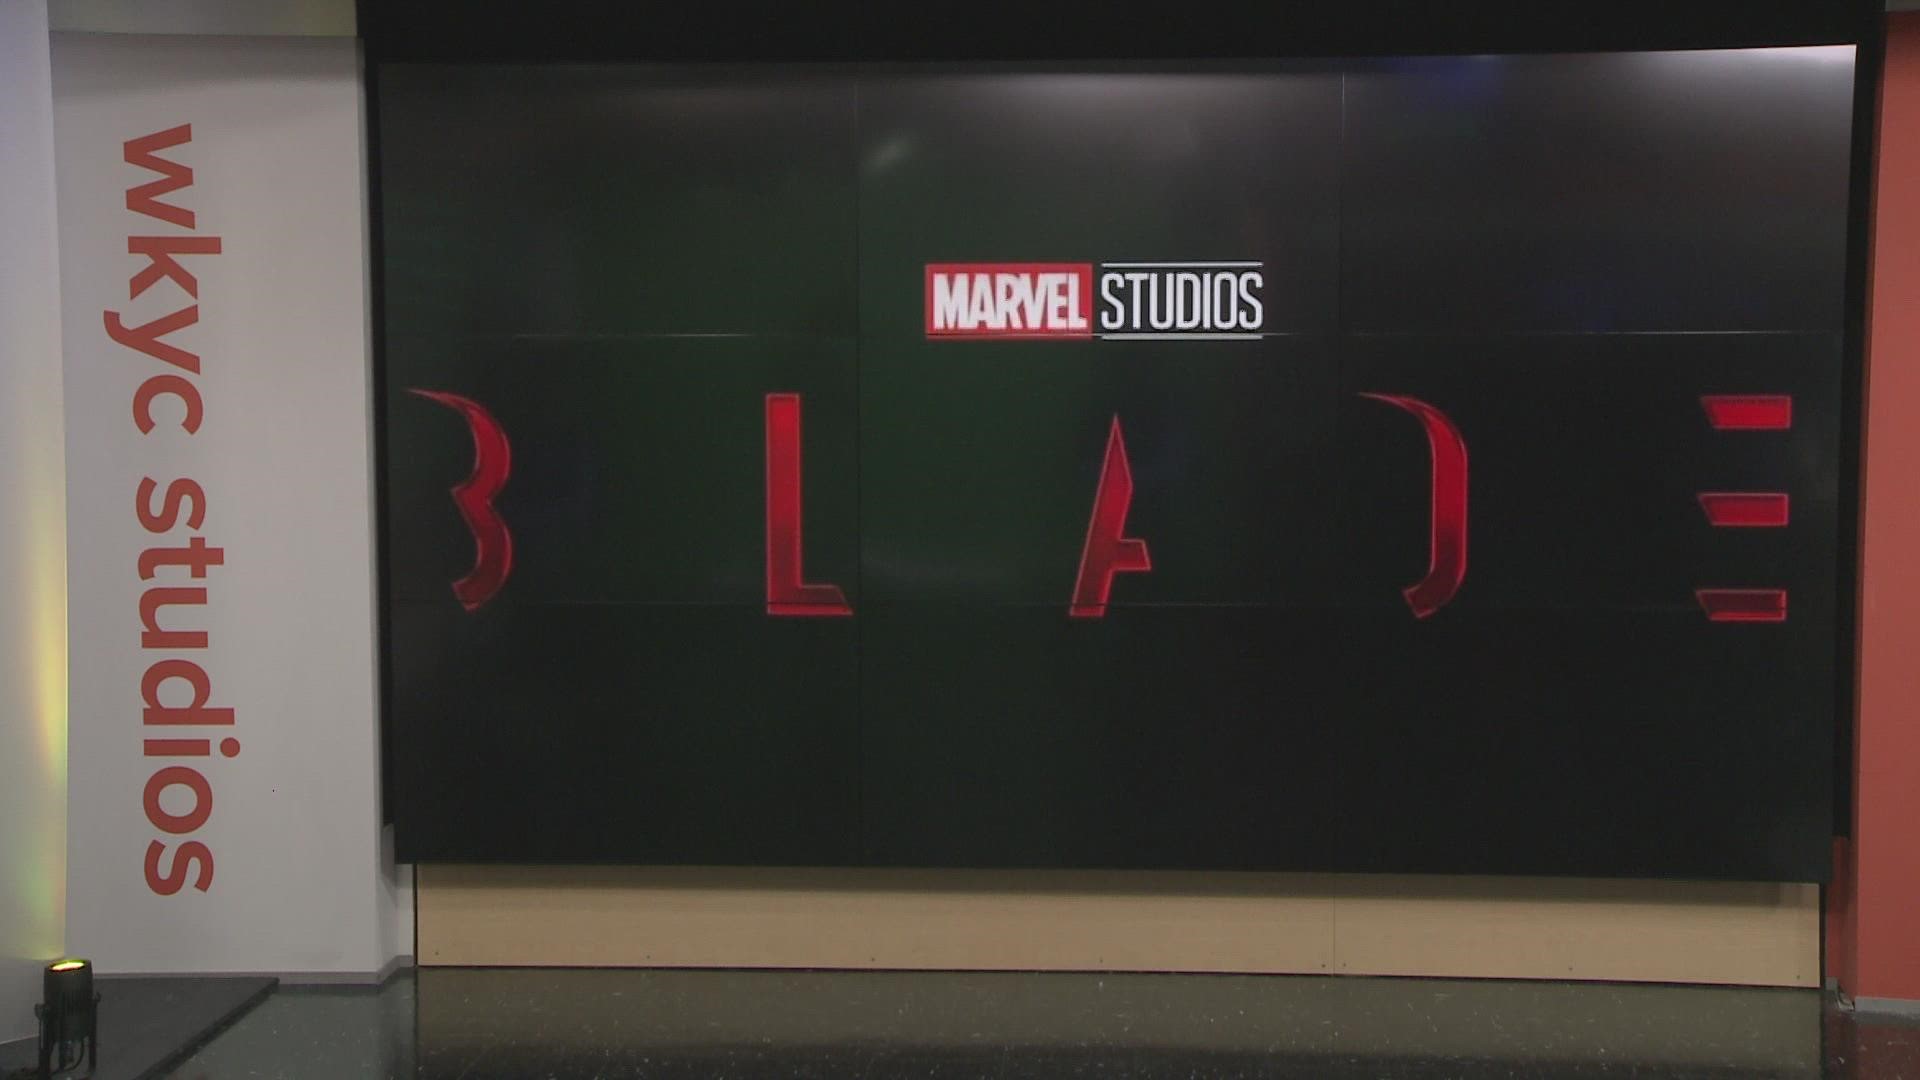 Marvel Studios is back in Cleveland to film a portion of its new 'Blade' movie -- and this is your chance to be an extra.